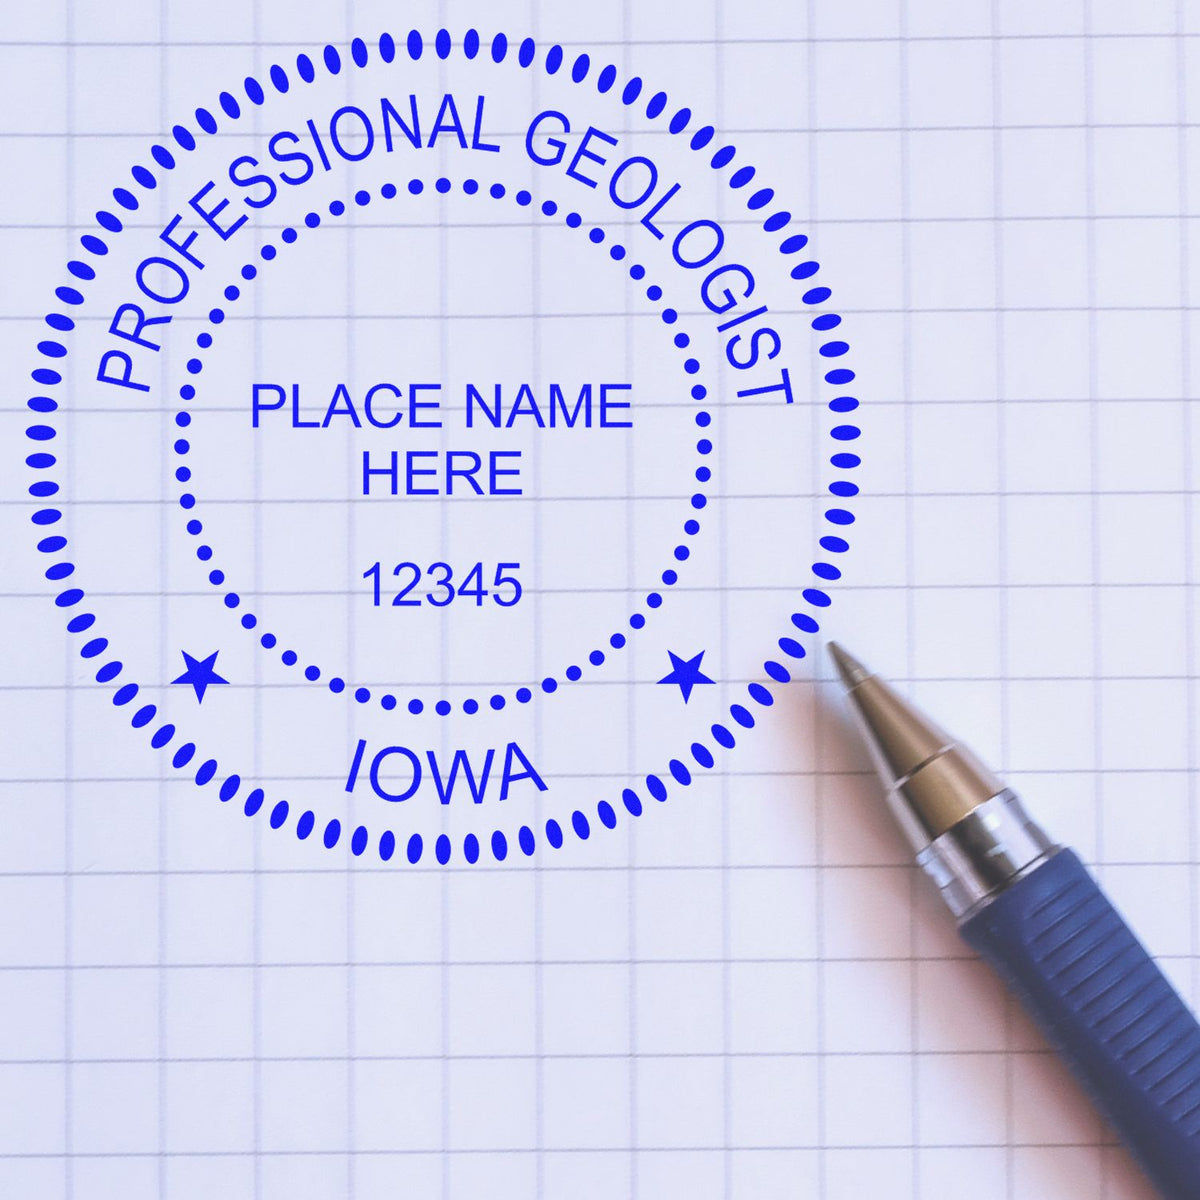 An alternative view of the Iowa Professional Geologist Seal Stamp stamped on a sheet of paper showing the image in use